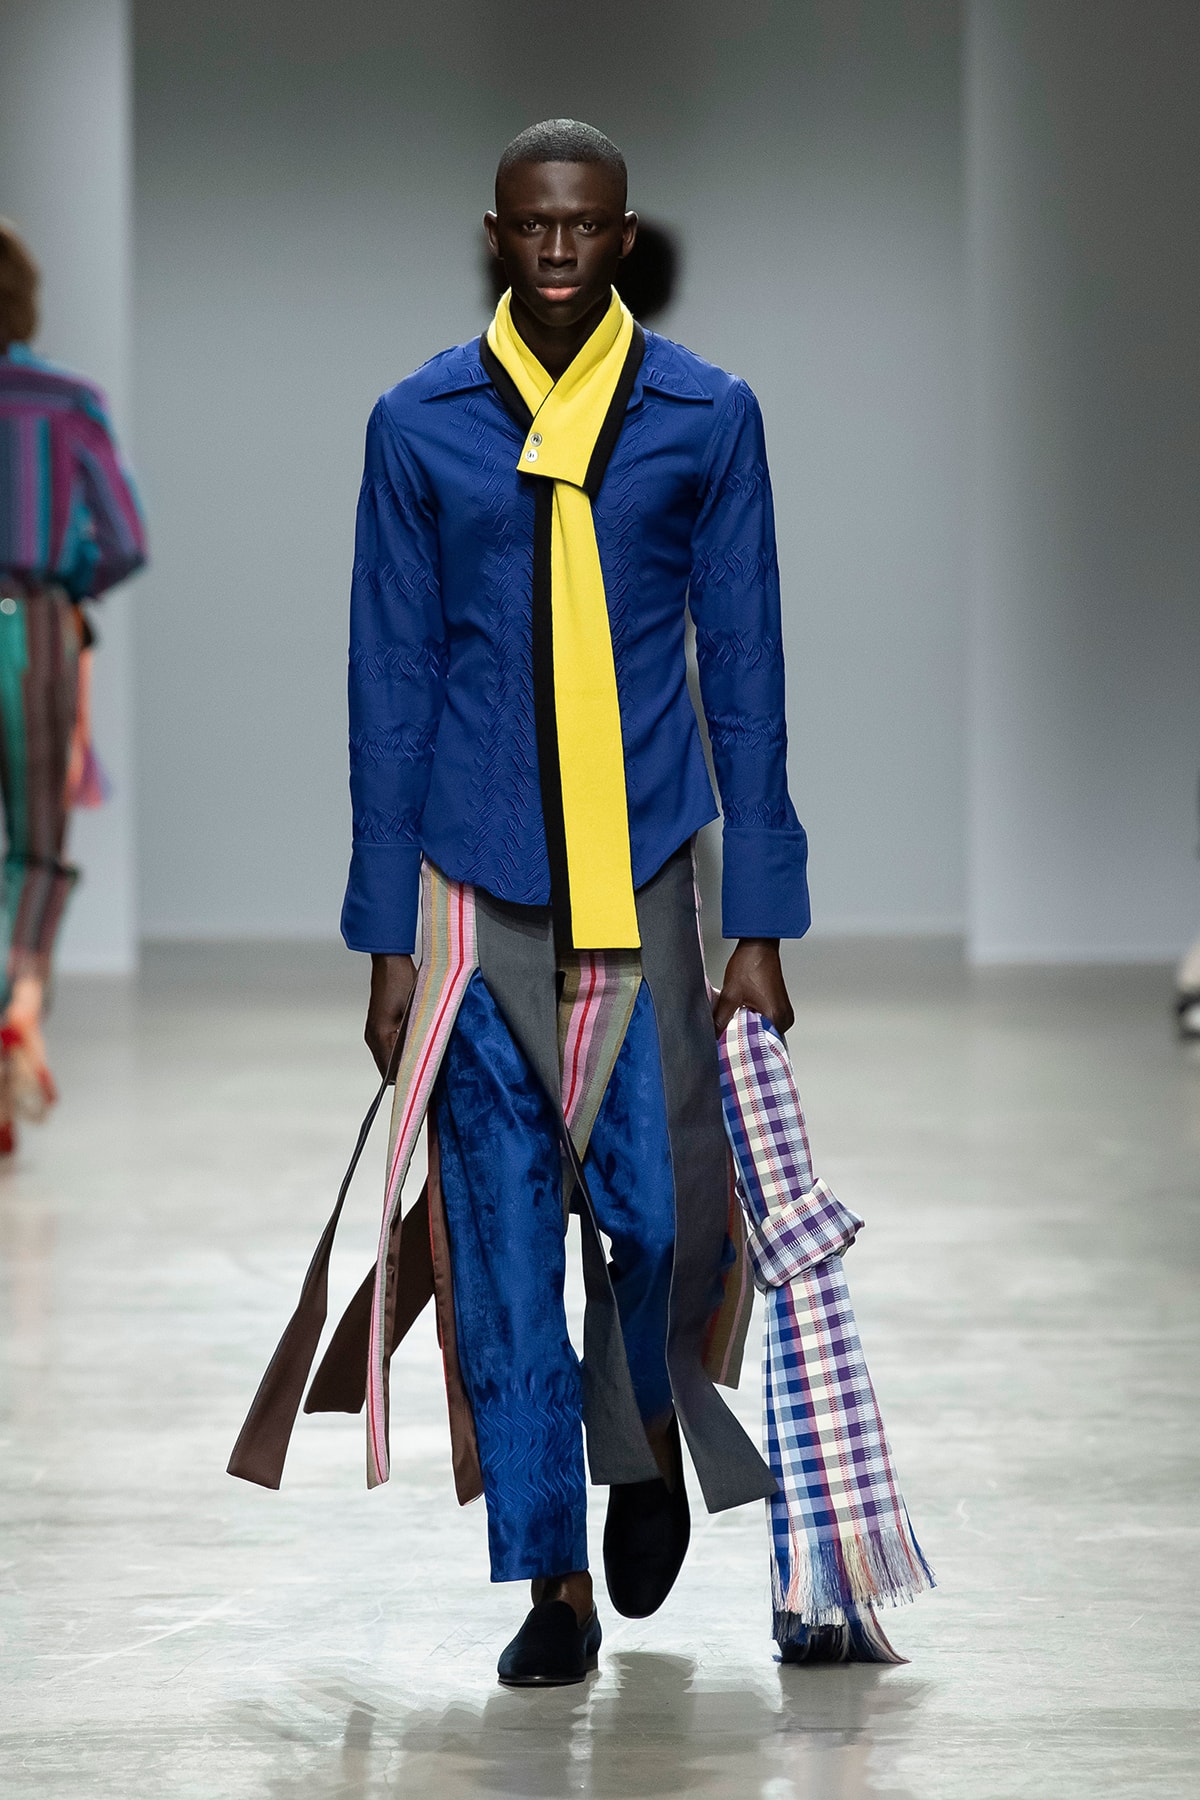 Kenneth Ize Fall/Winter 2020 Collection Runway Show Shirt Blue Tie Yellow